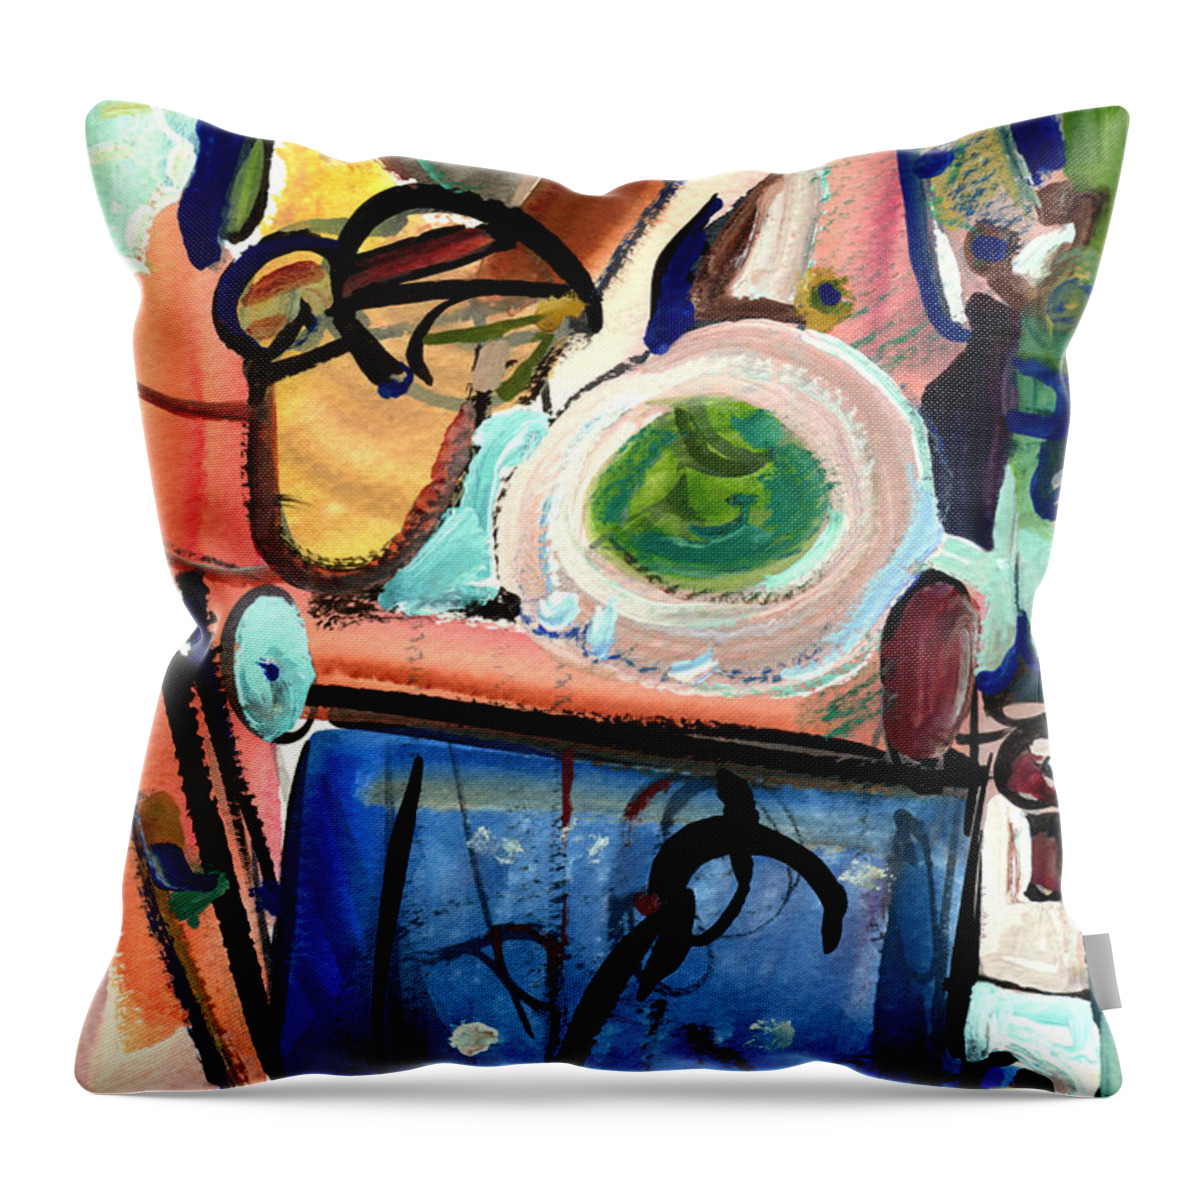 Abstract Art Throw Pillow featuring the painting The Aquarium by Stephen Lucas